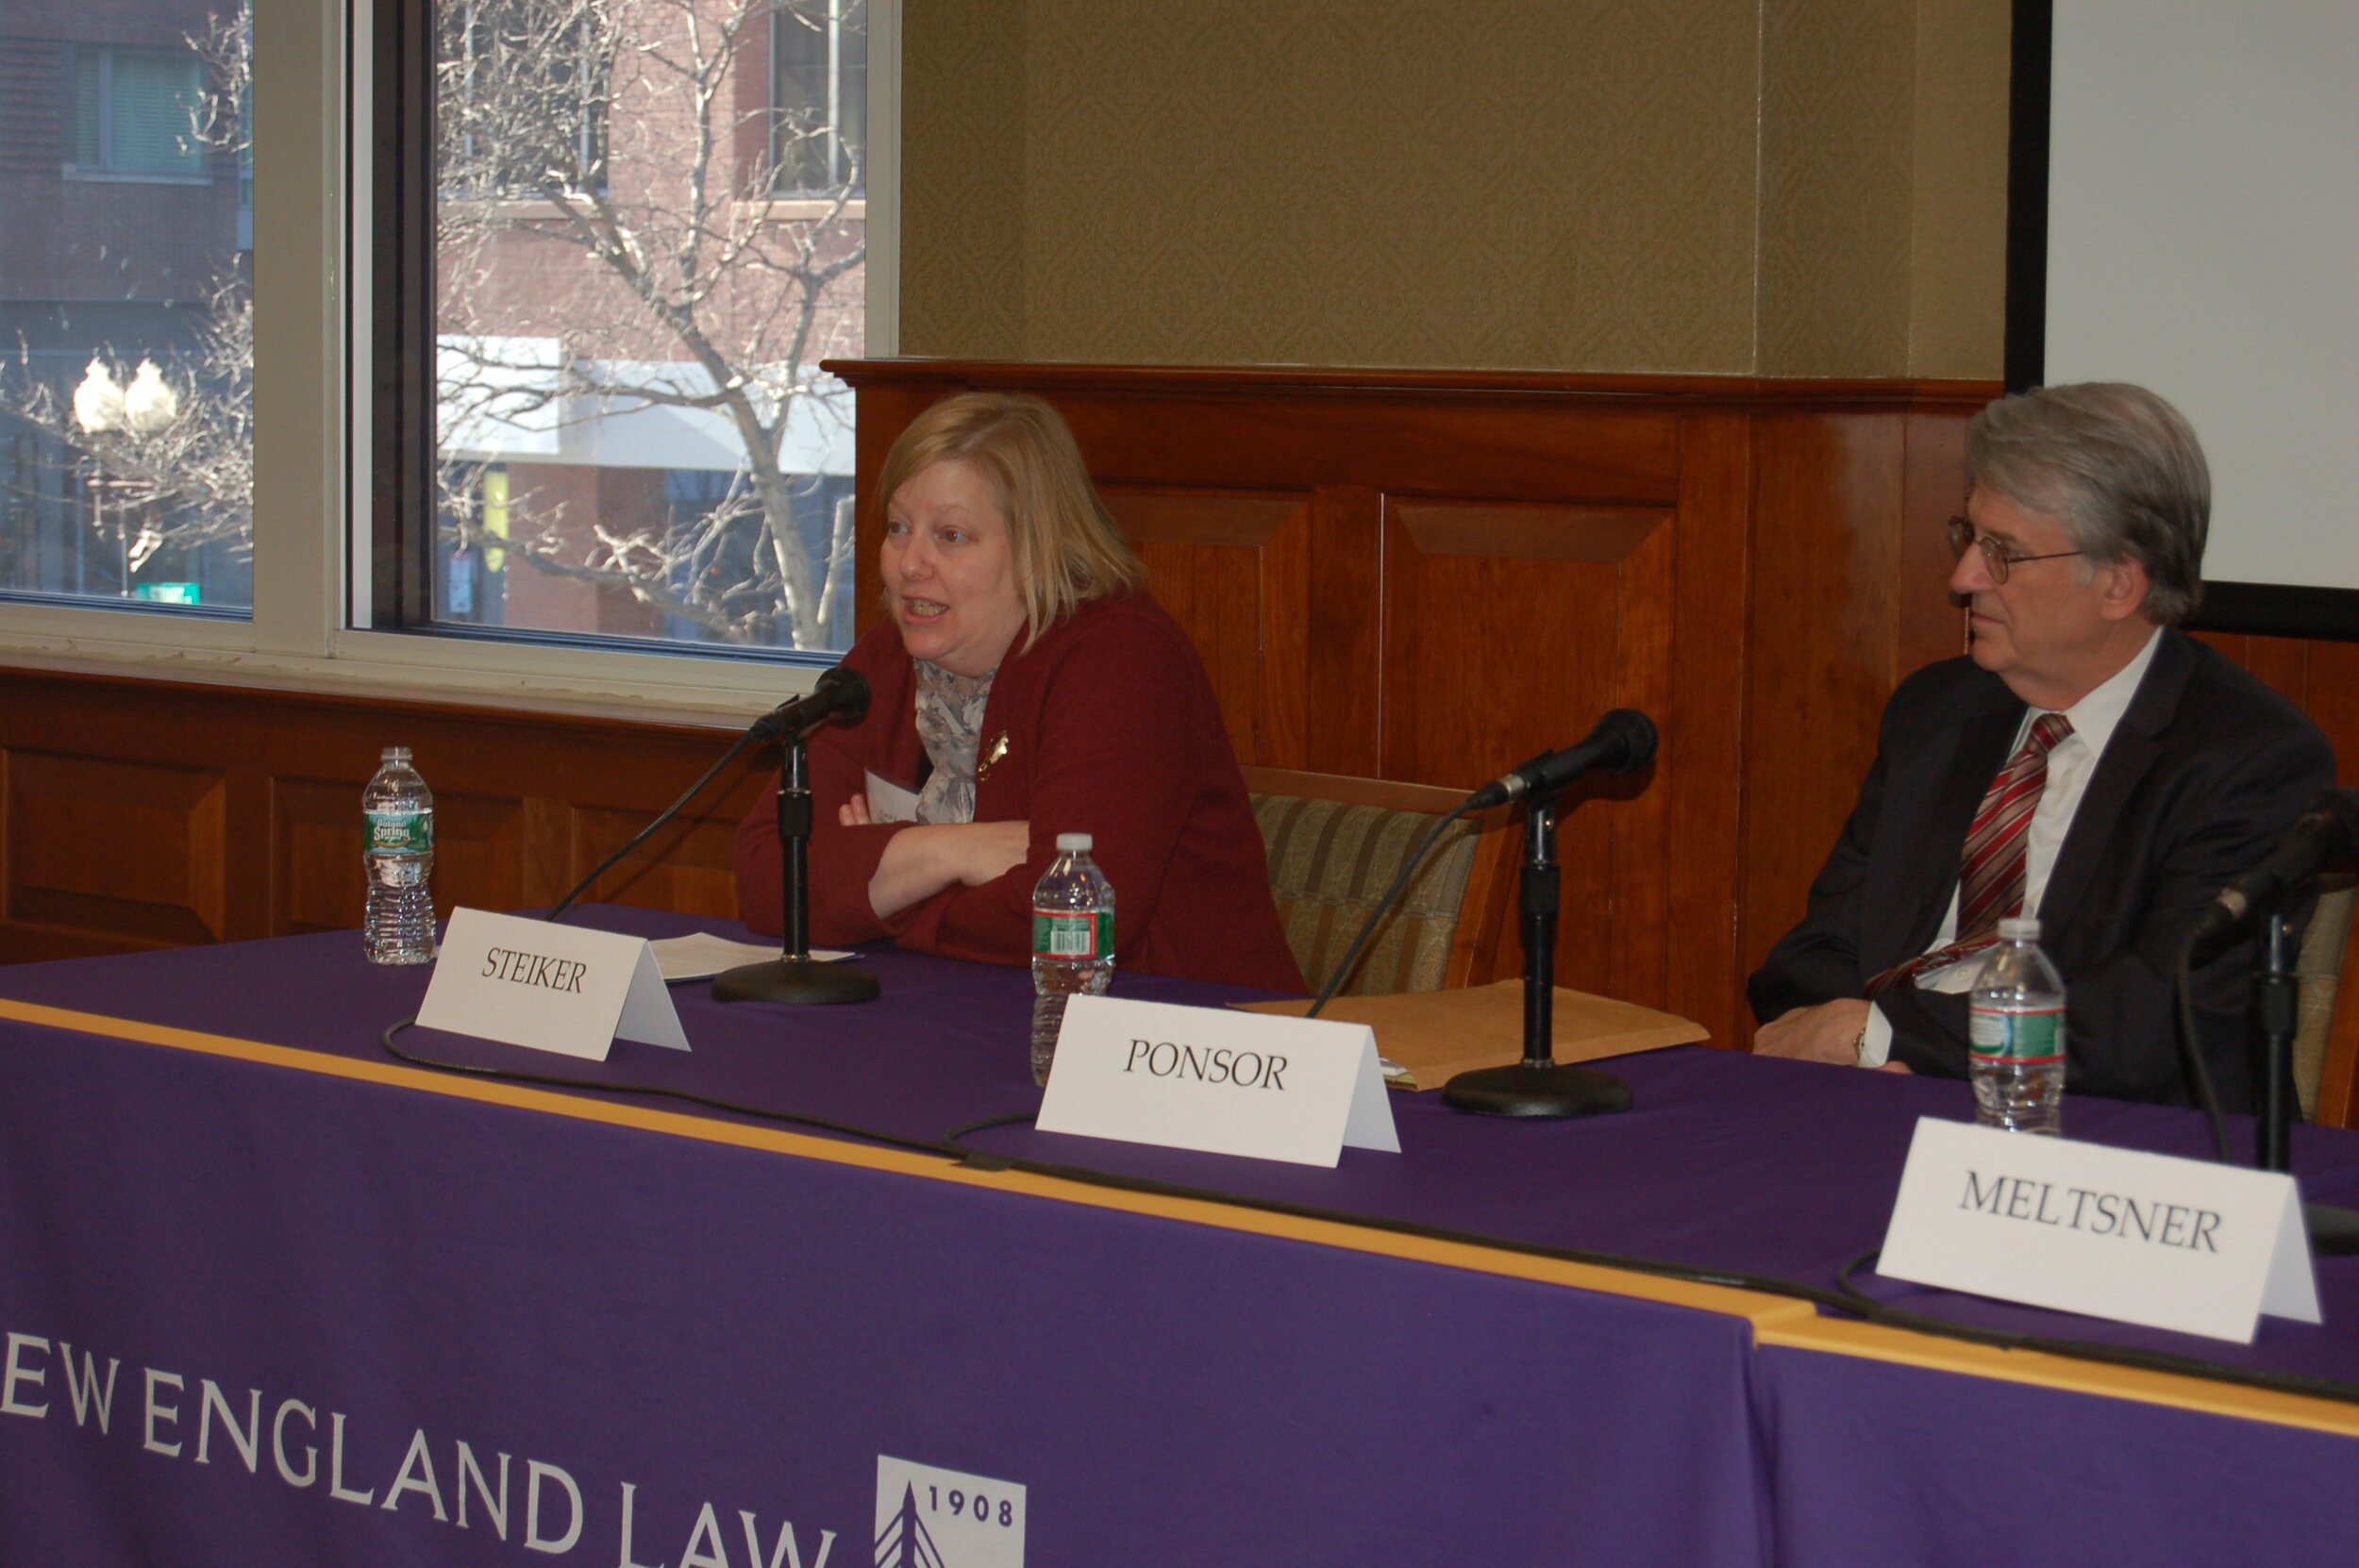  Professor Carol S. Steiker of Harvard Law answers a question from the audience. The Hon. Hon. Michael Ponsor looks on. 